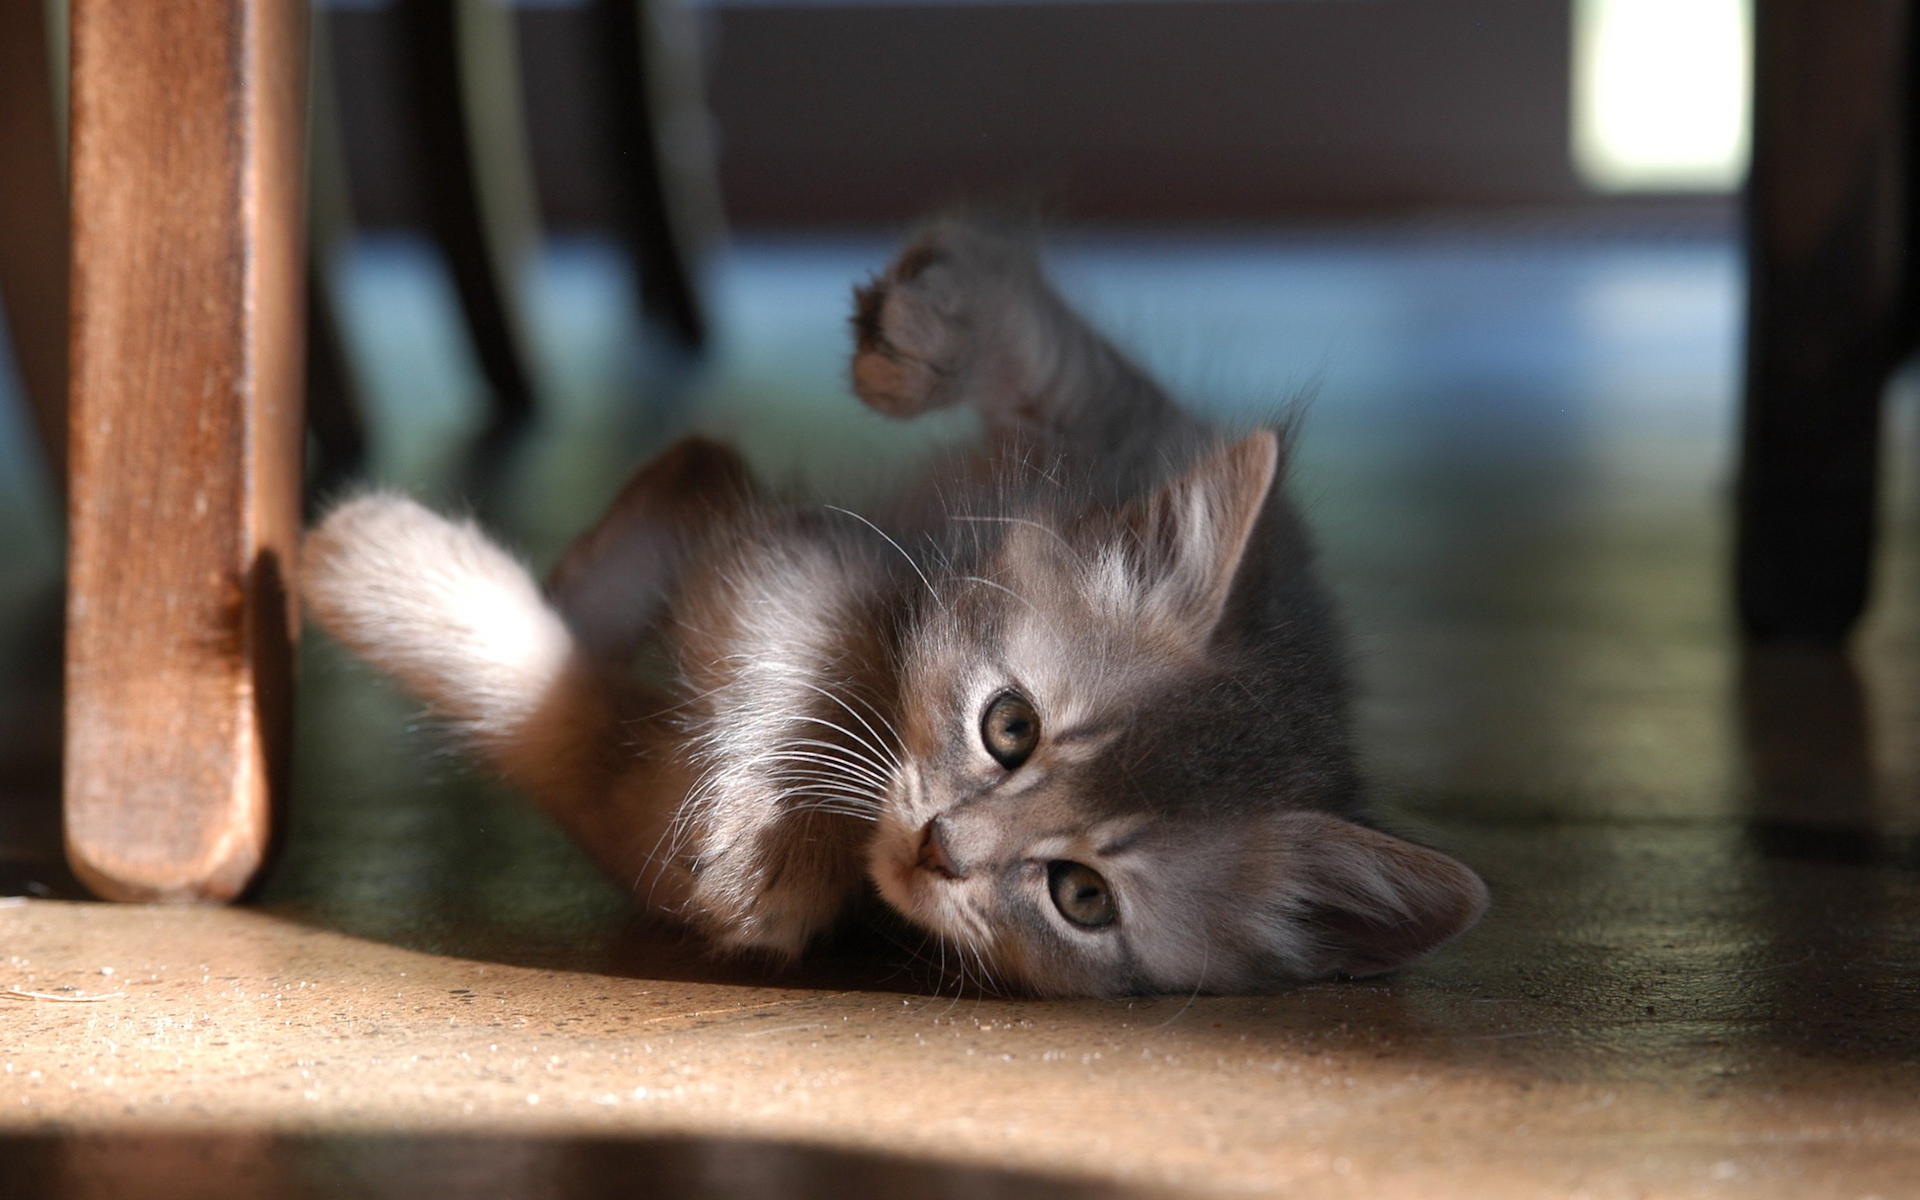 Caturday pic of a kitten rolling on its back